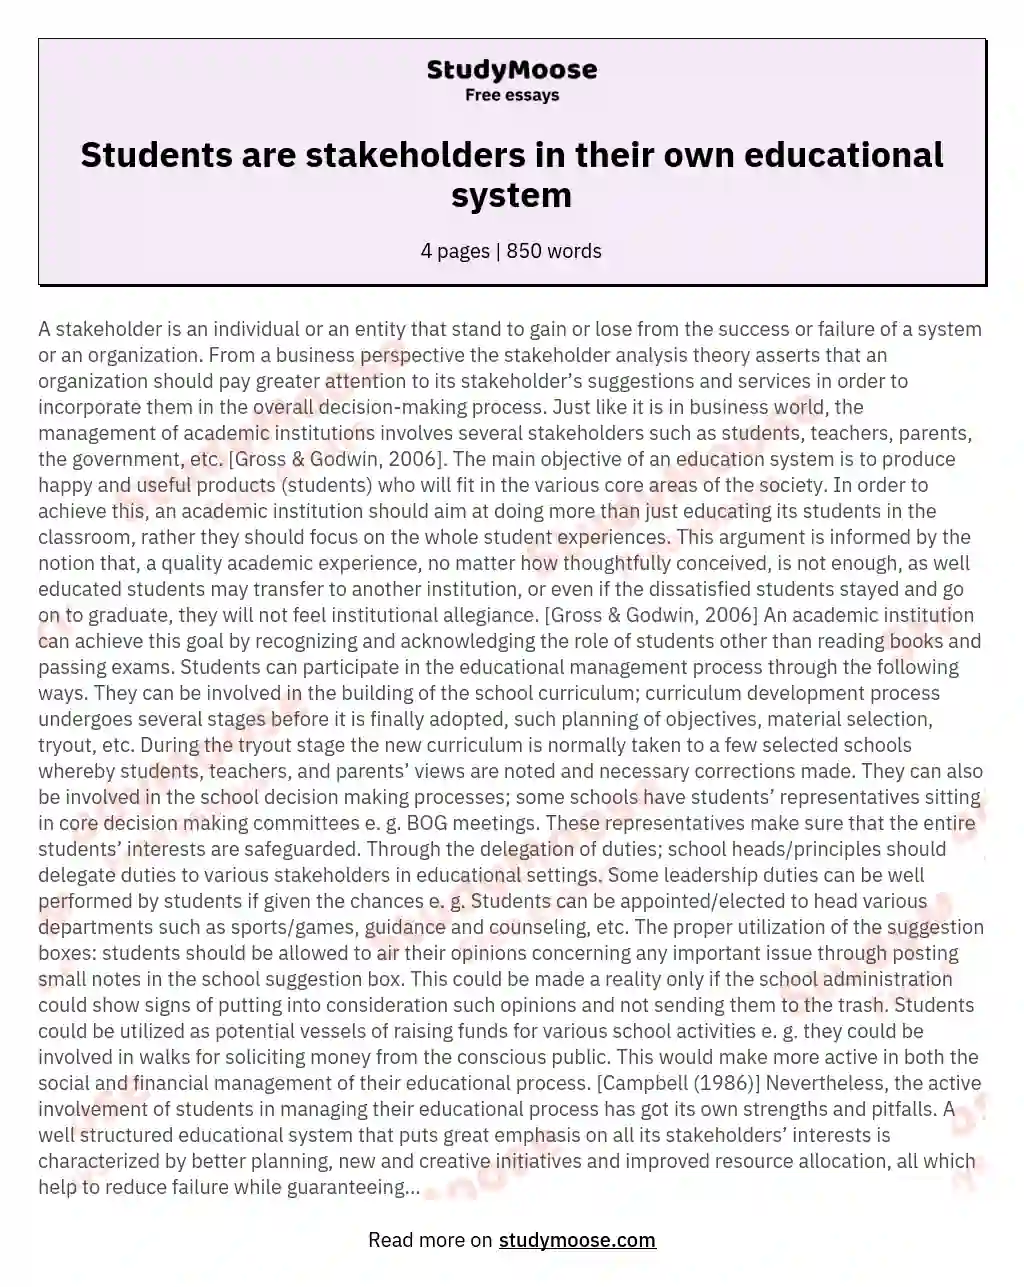 Students are stakeholders in their own educational system essay